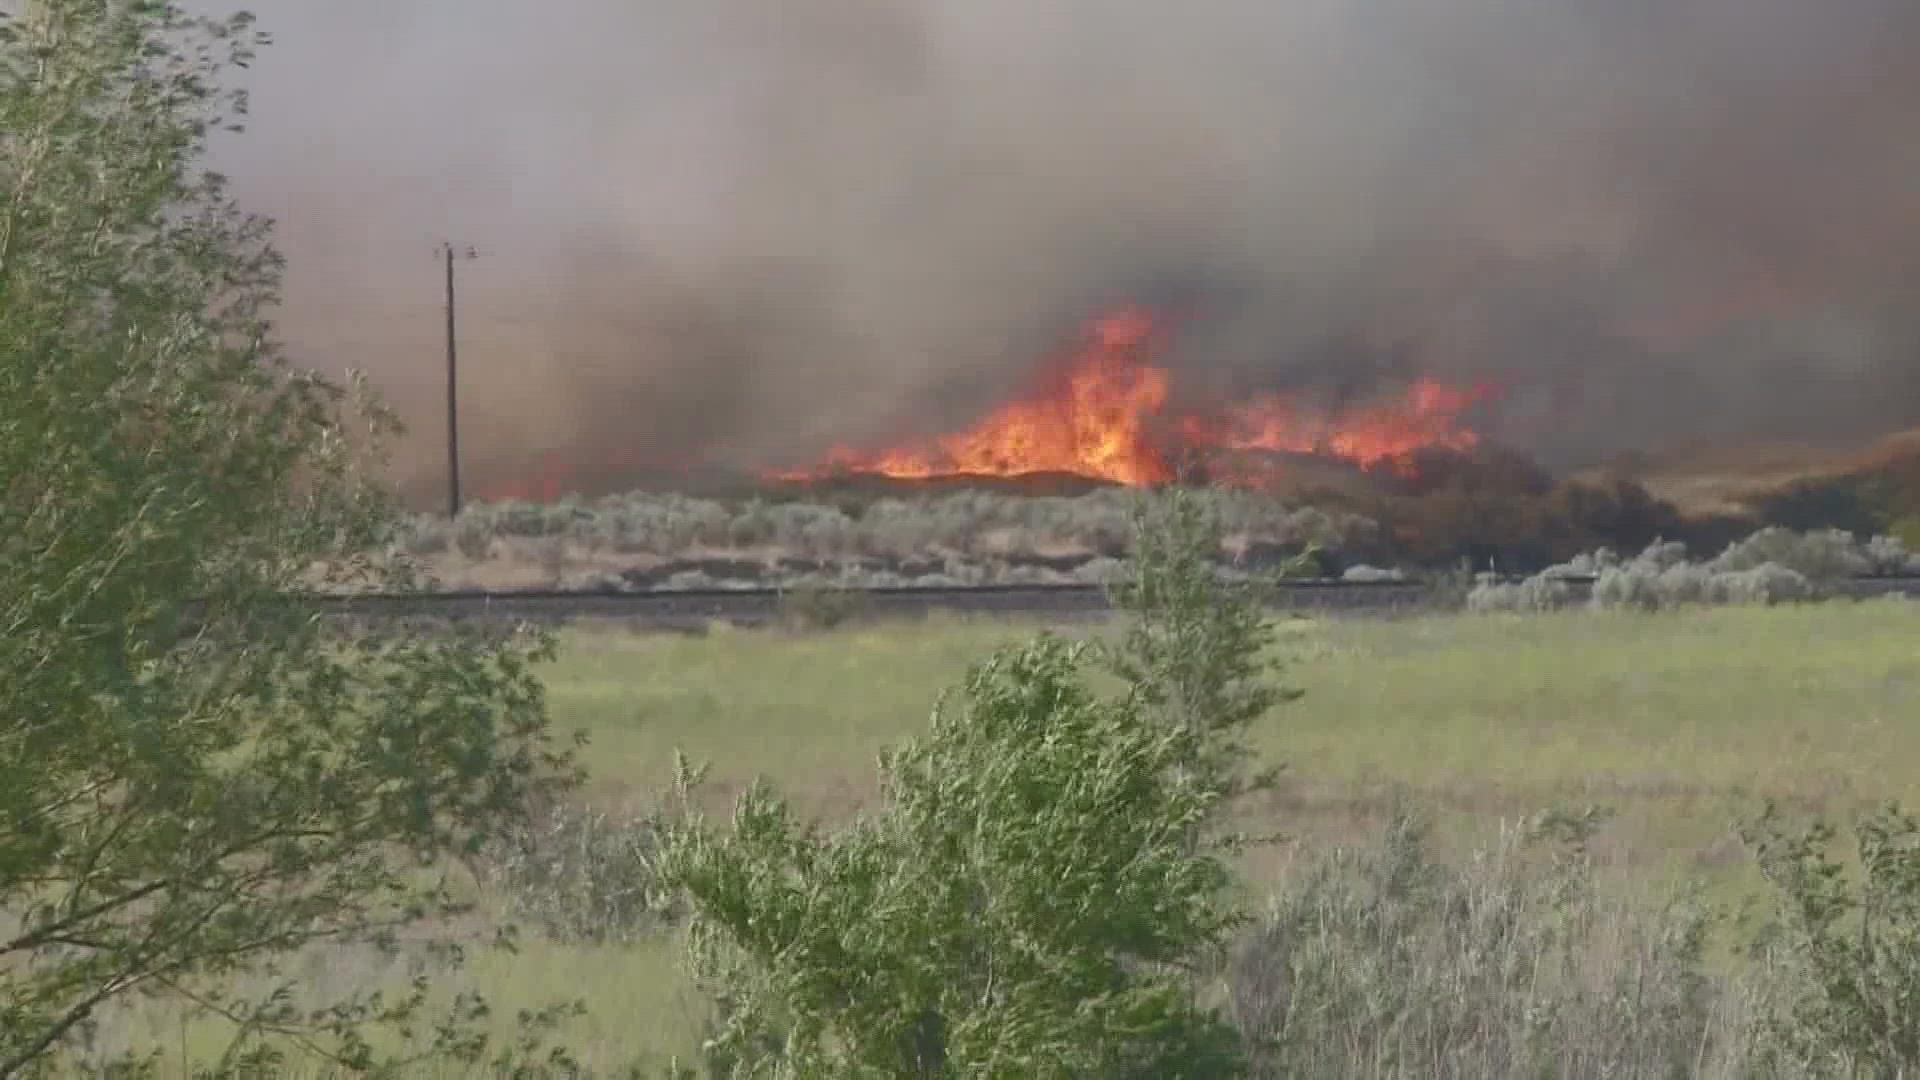 The Grant County Sheriff's Office says they are concerned with Fourth of July weekend coming up, as fireworks could lead to another serious brush fire.